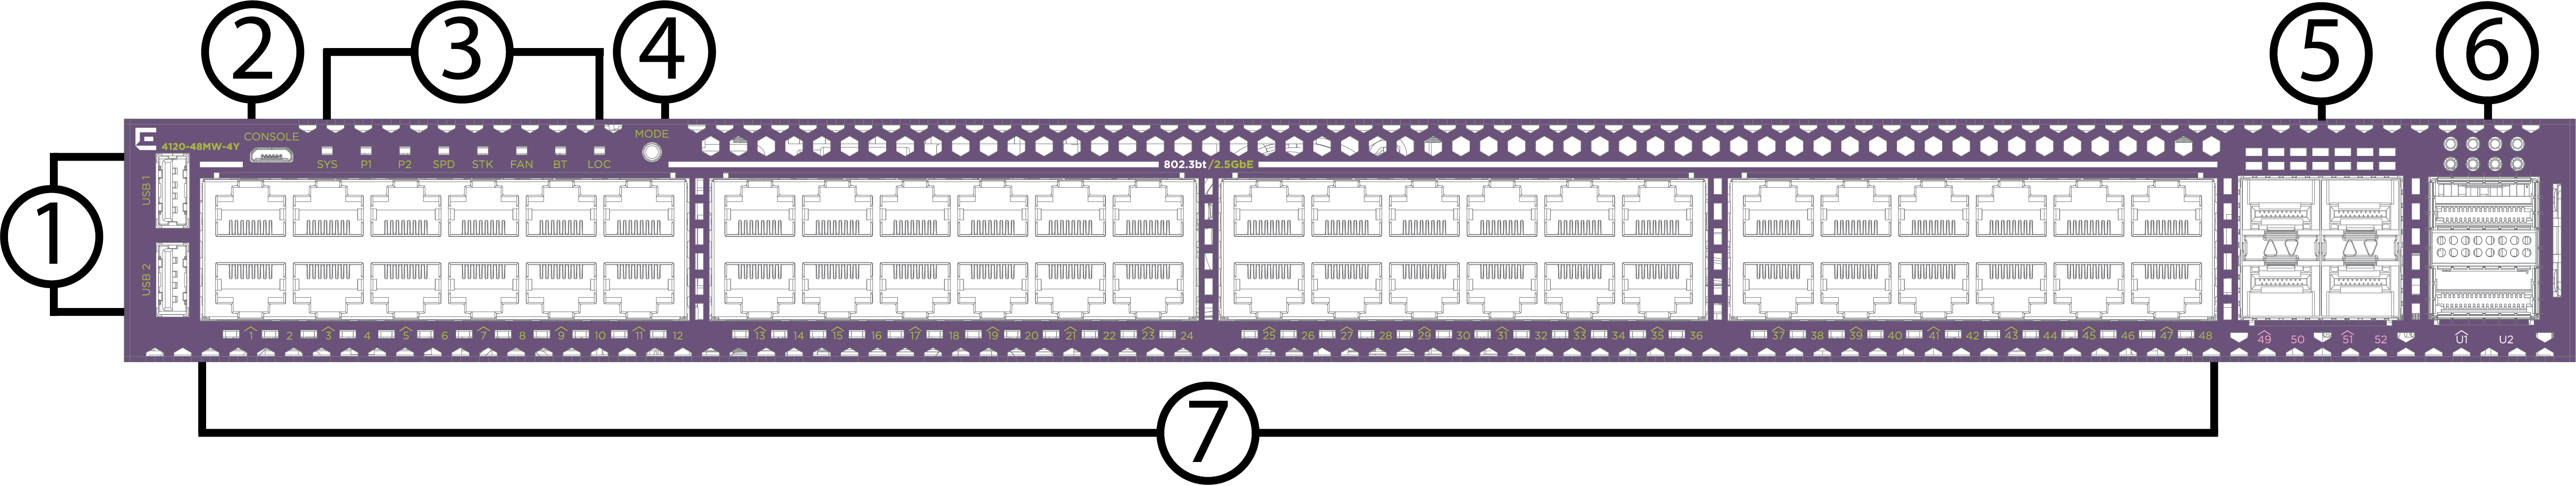 4120-48MW-4Y Front View